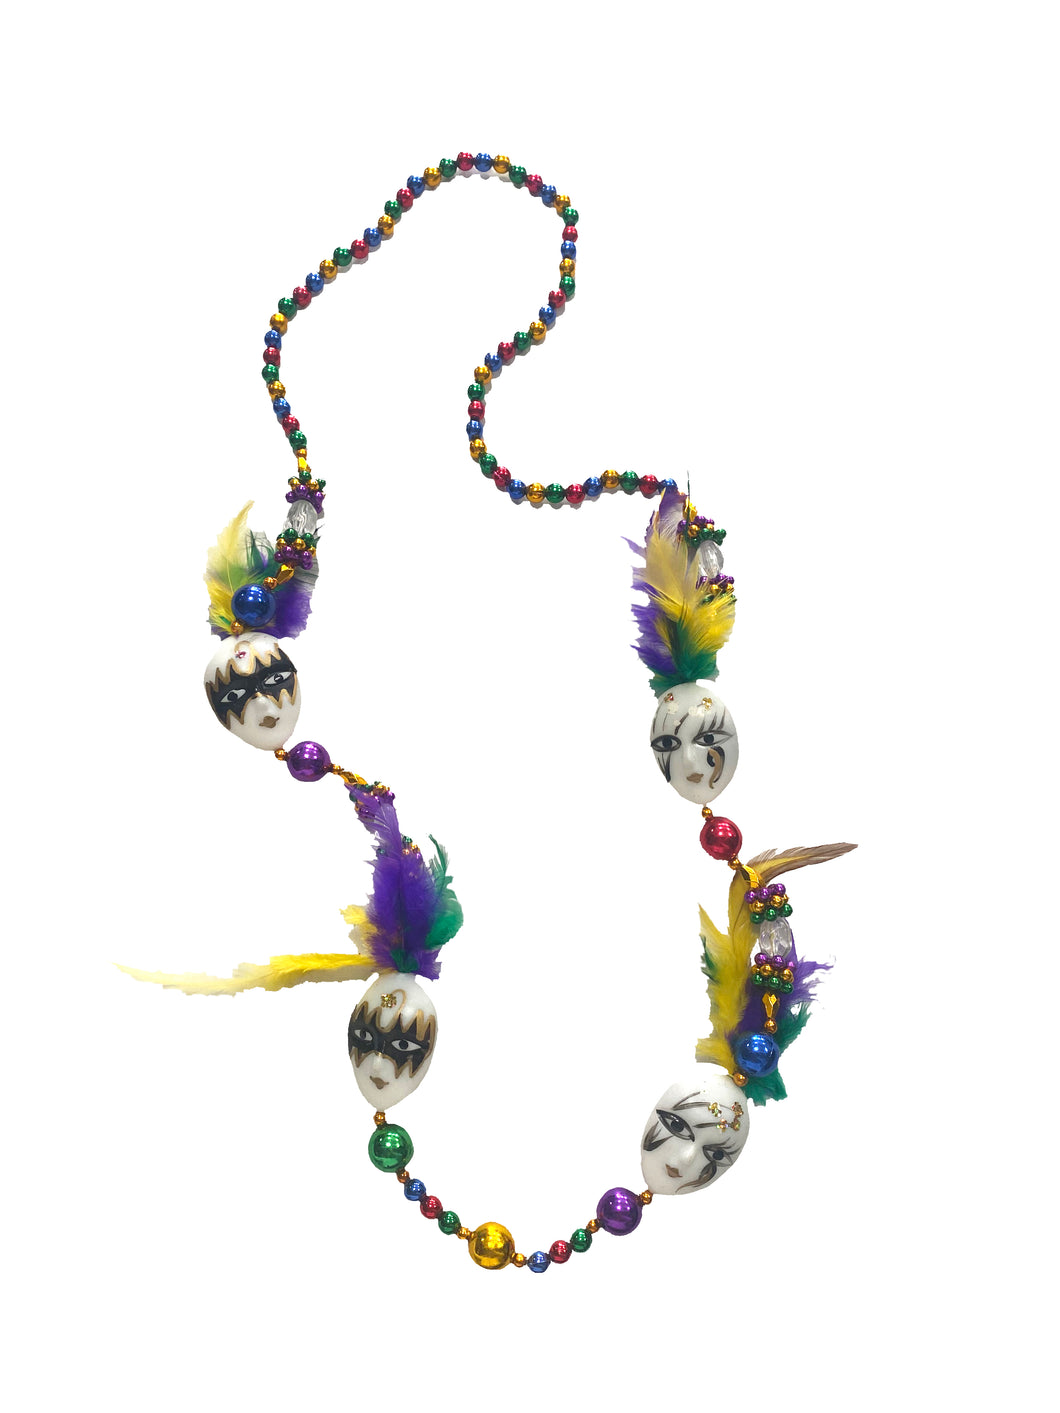 Jester Face Medallions with Feathers on Multicolor Specialty Bead